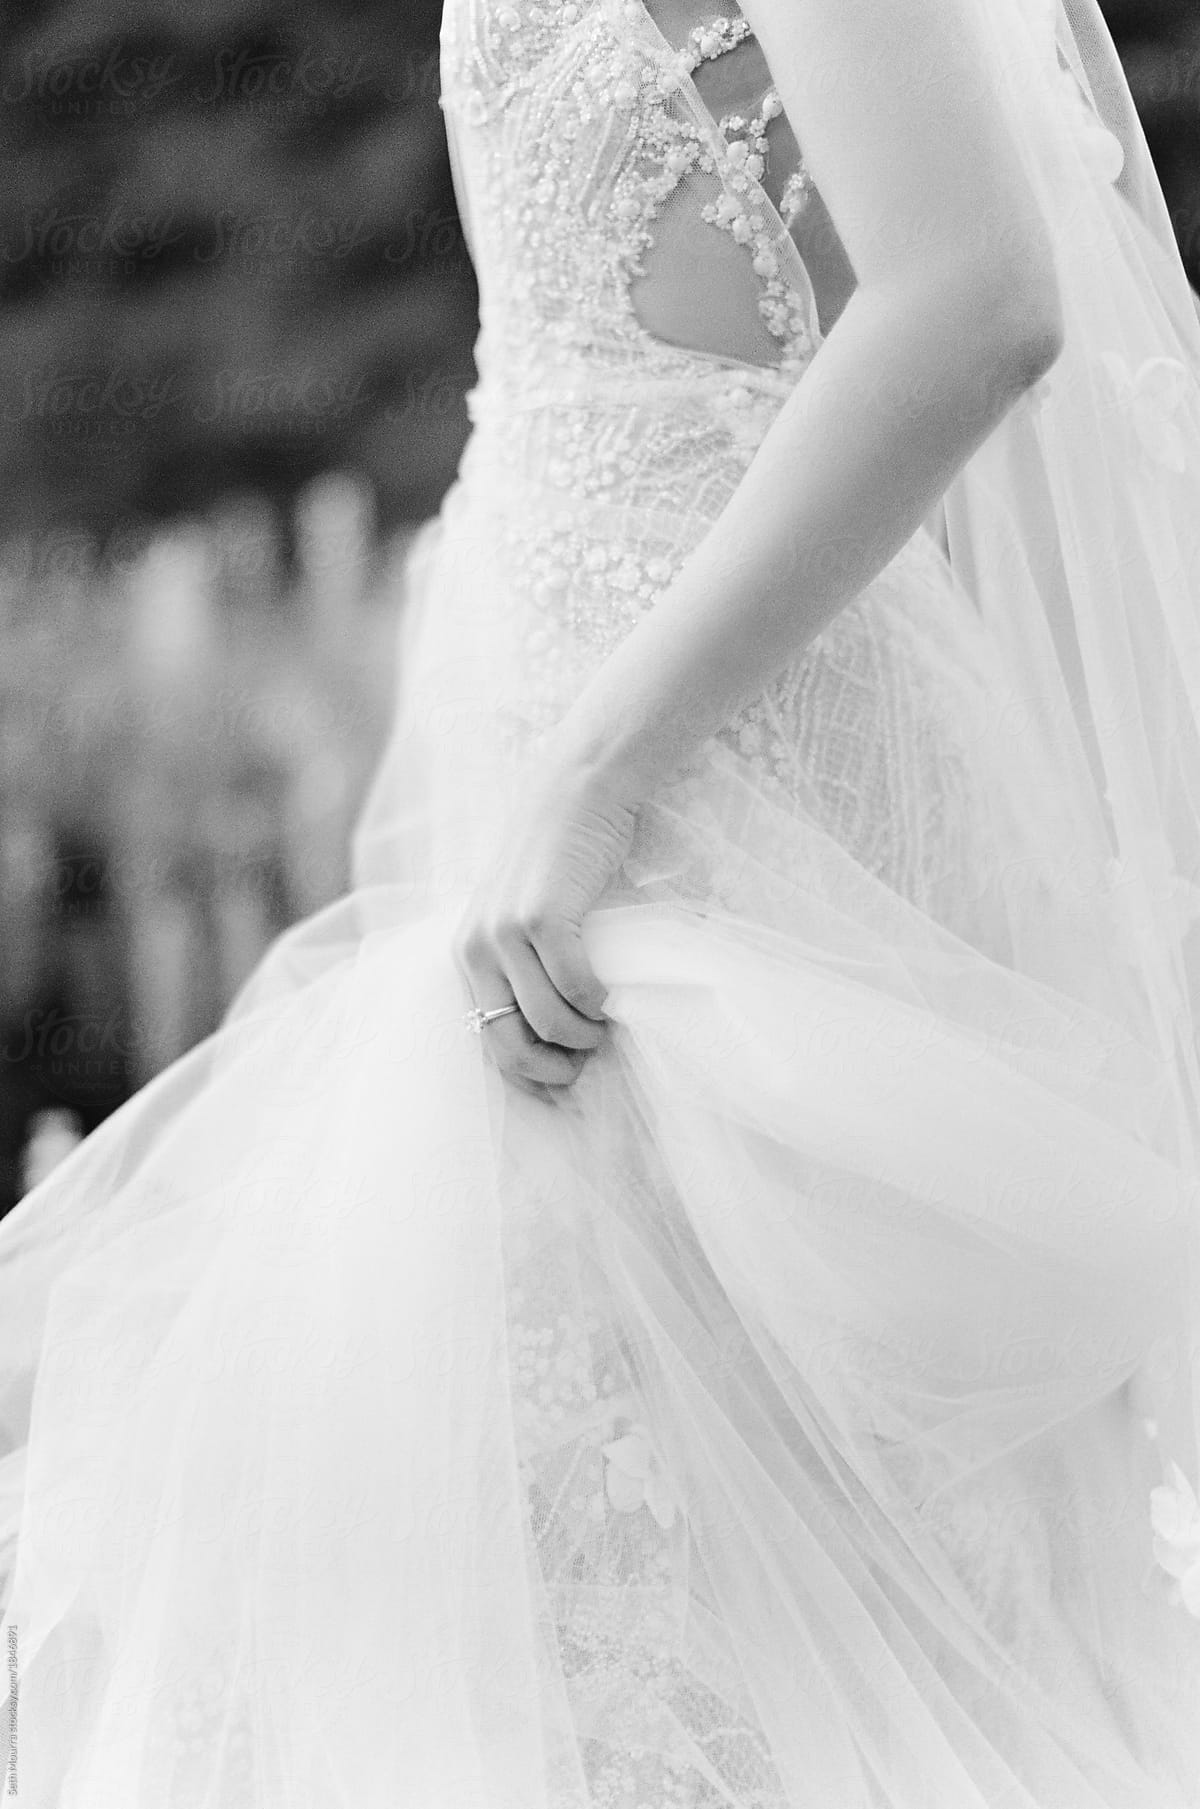 A bride delicately holds her wedding gown